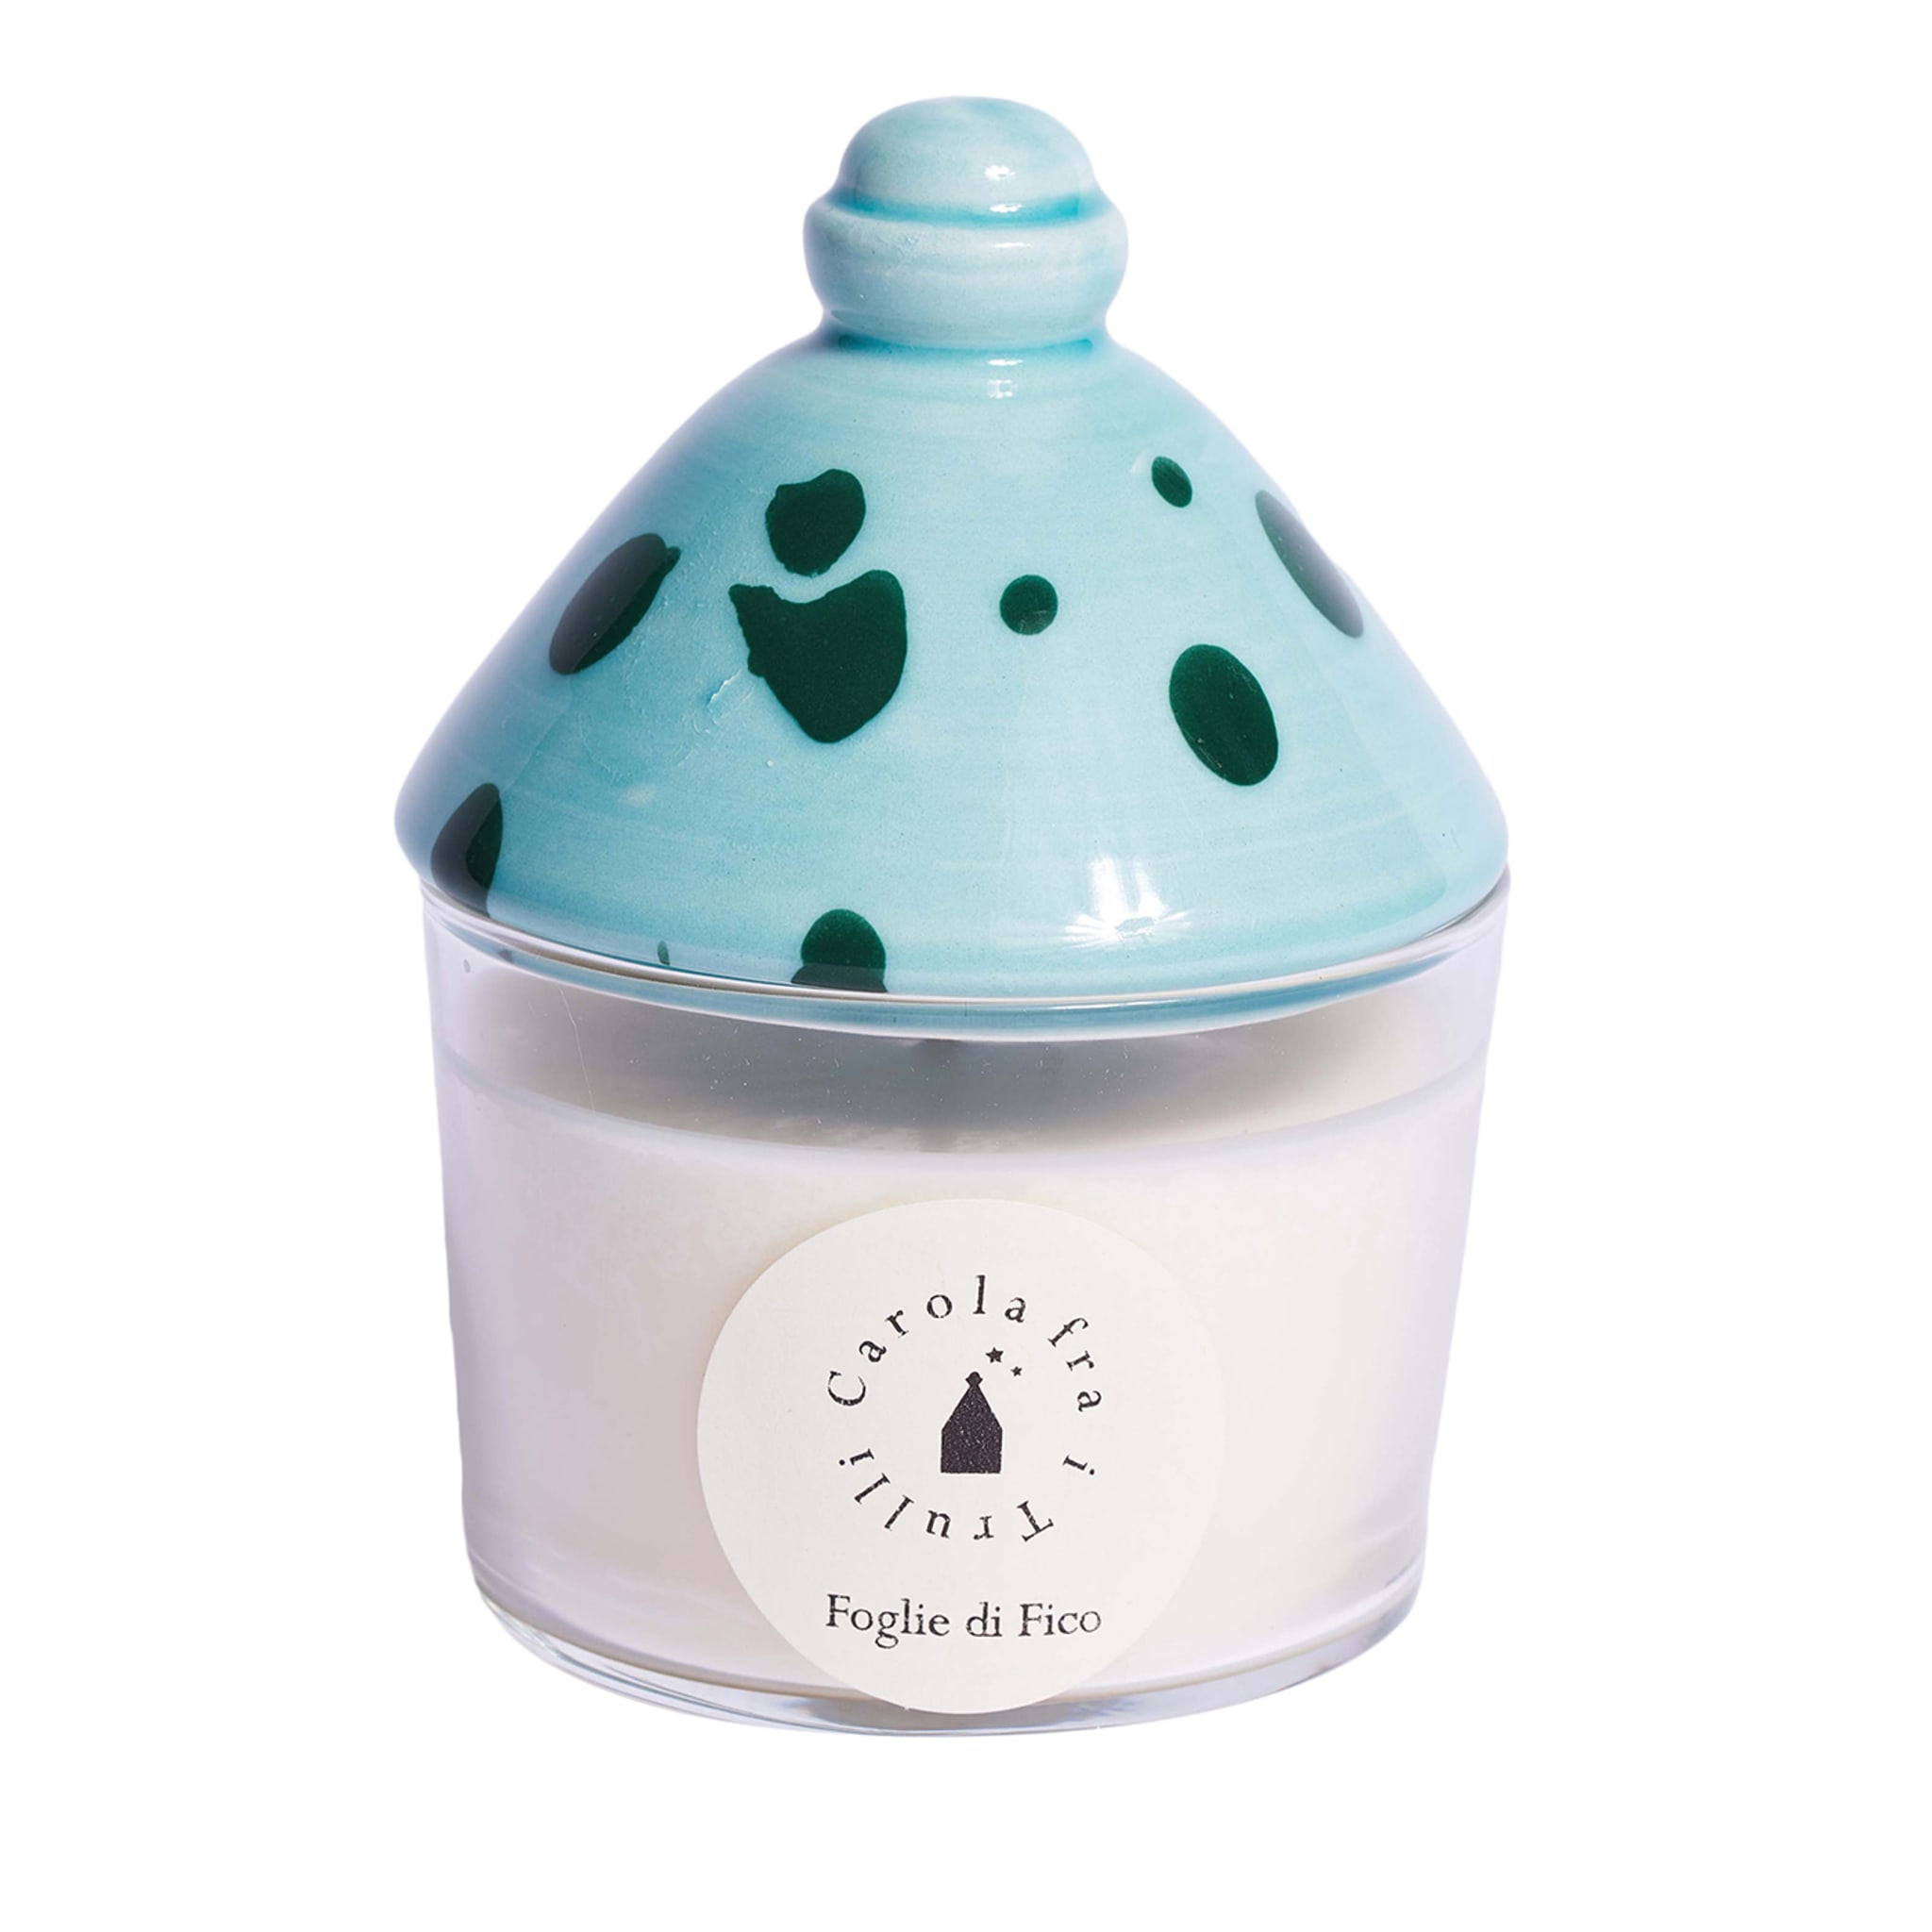 Foglie di Fico Scented Candle with Ceramic Lid #1 - Main view